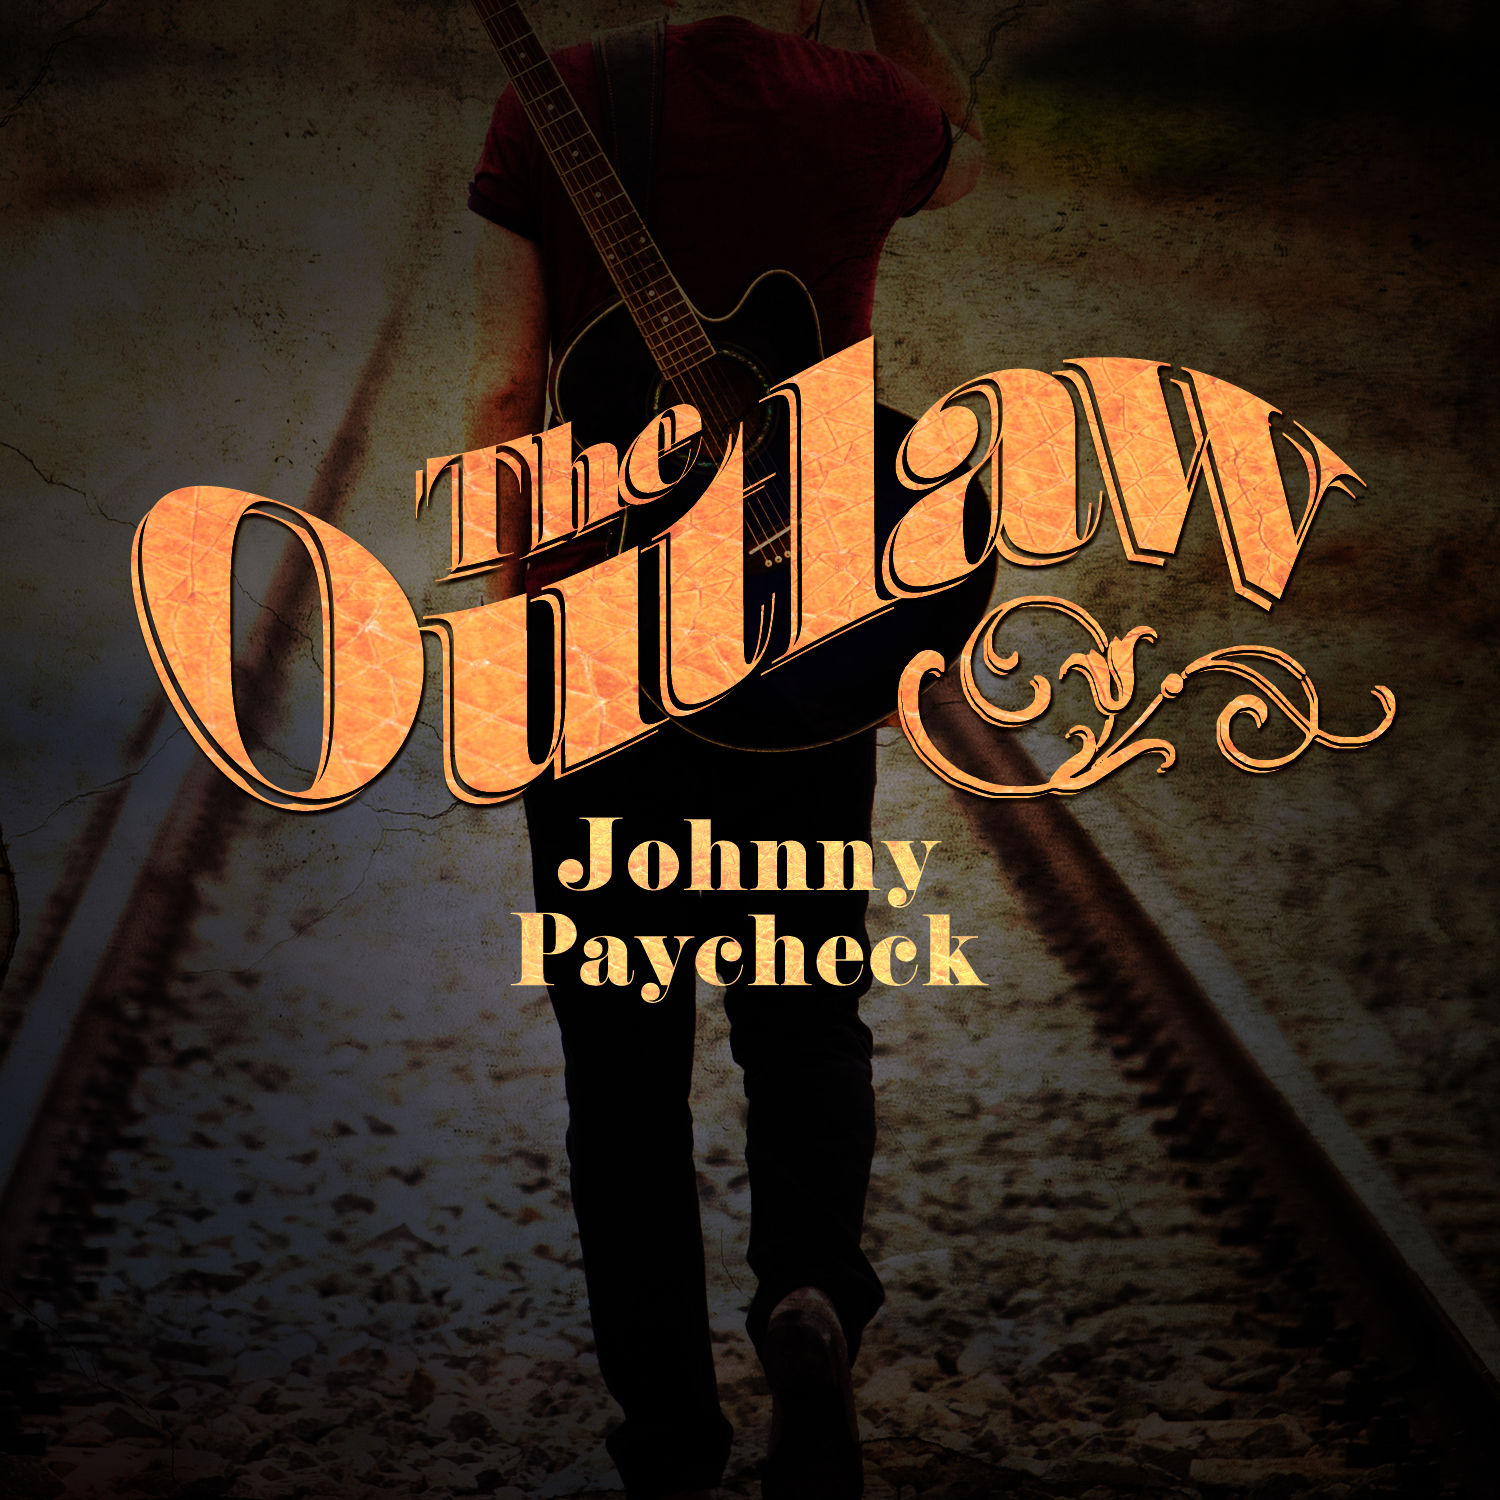 Johnny Paycheck - The Outlaw (2013)